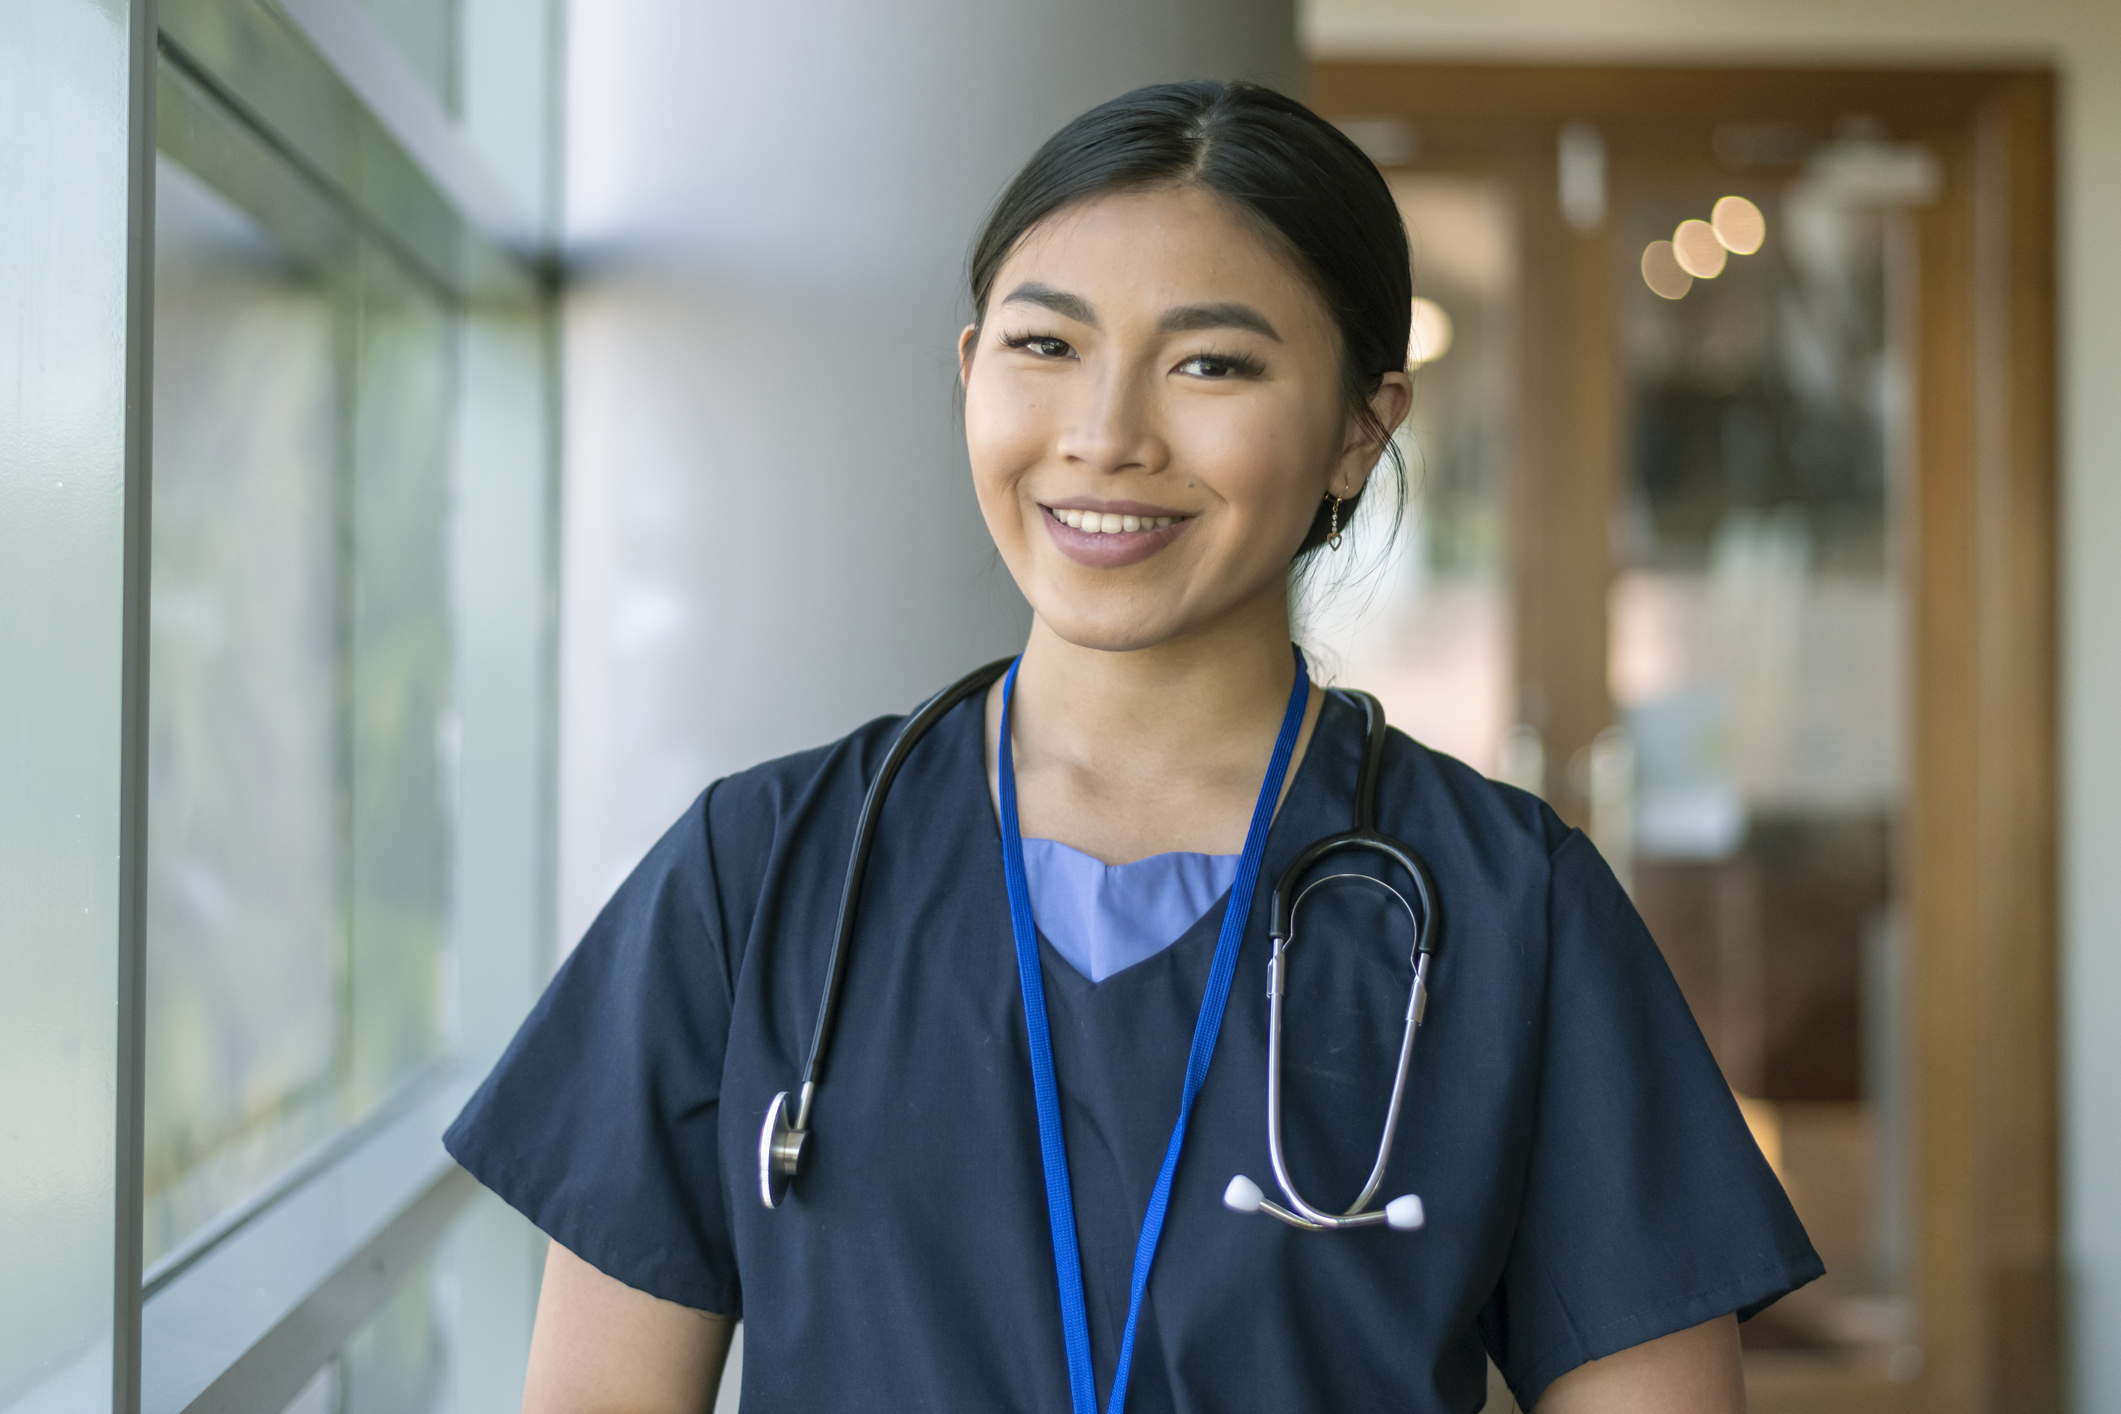 A Young Doctor Poses With A Stethoscope In Uniform Outdoor Shes Holding  Clipboard In Her Hands Stock Photo - Download Image Now - iStock